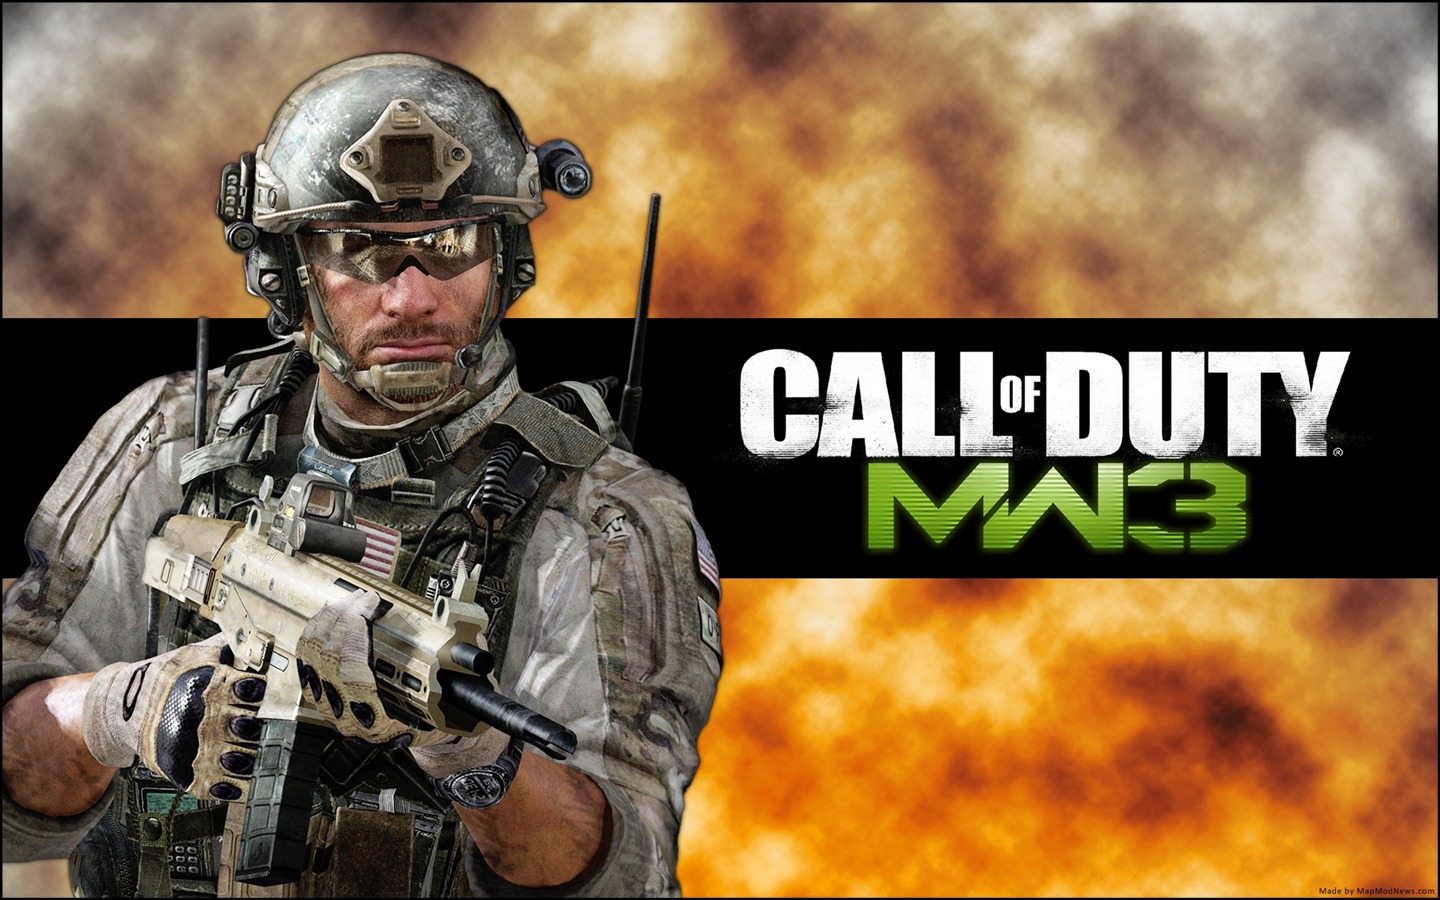 Call of Duty: MW3 HD wallpapers #14 - 1440x900